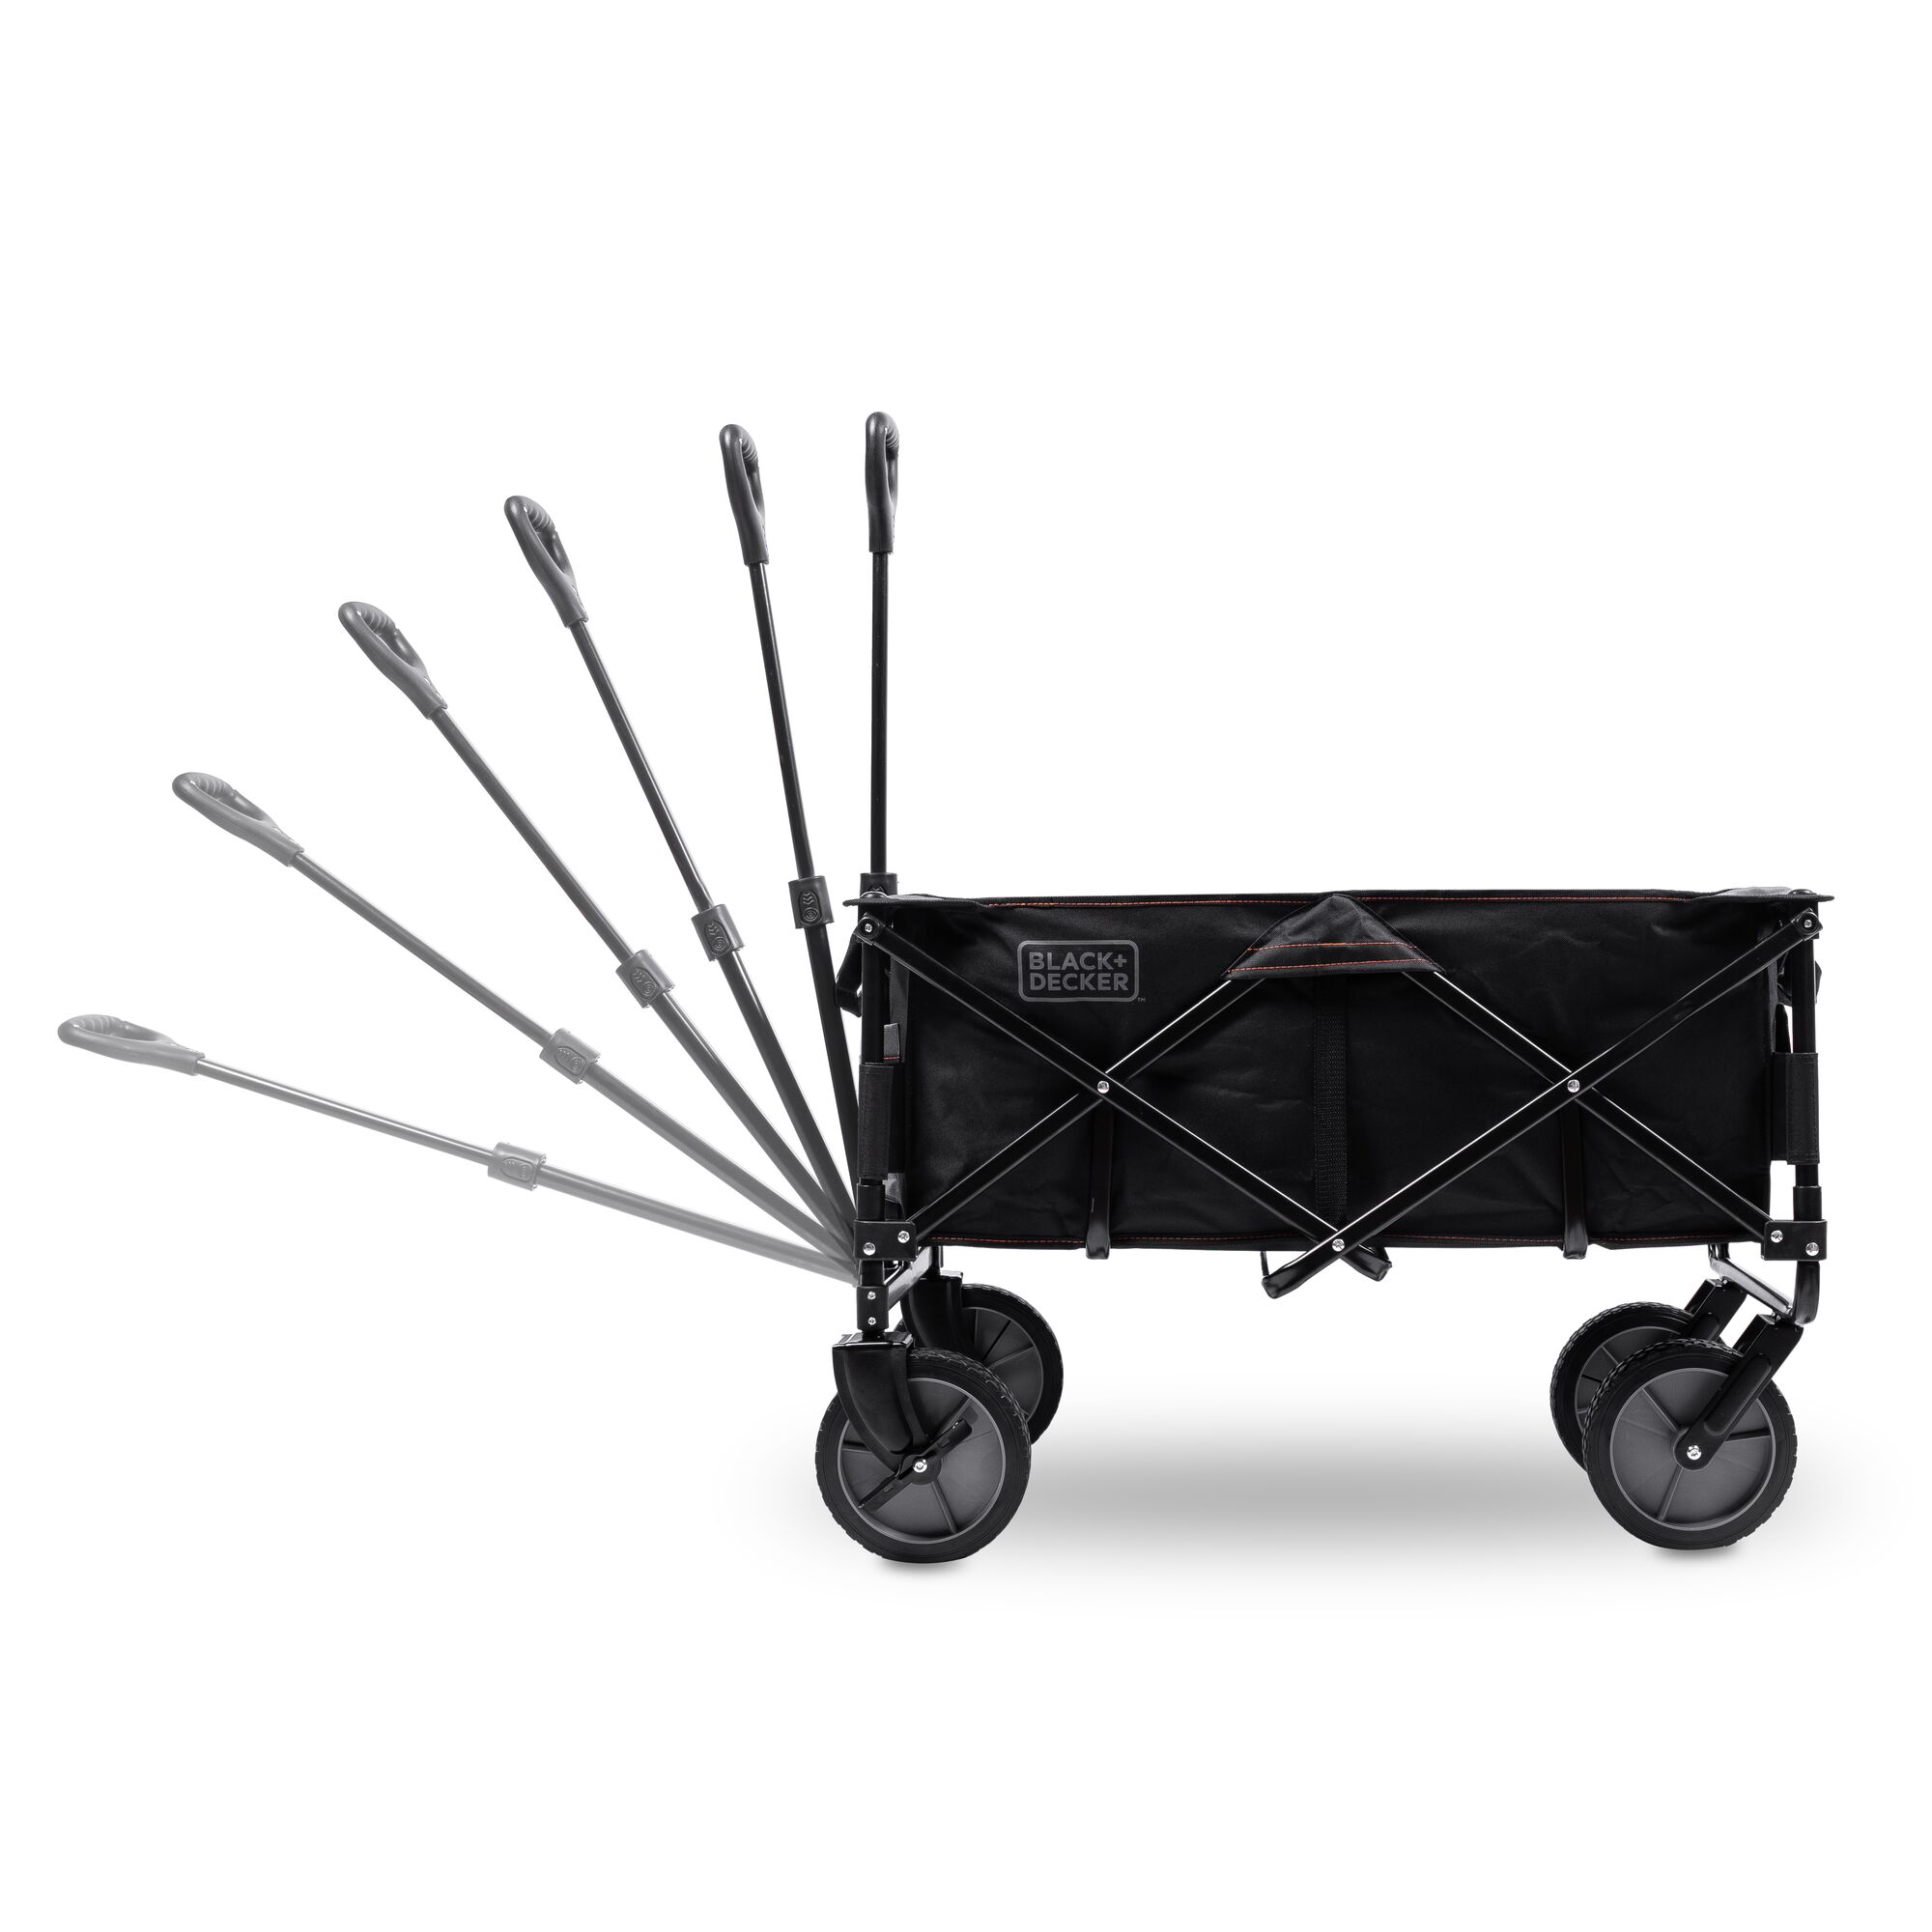 Side view of the BLACK+DECKER utility wagon, collapsible/folding wagon showing the different handle stops